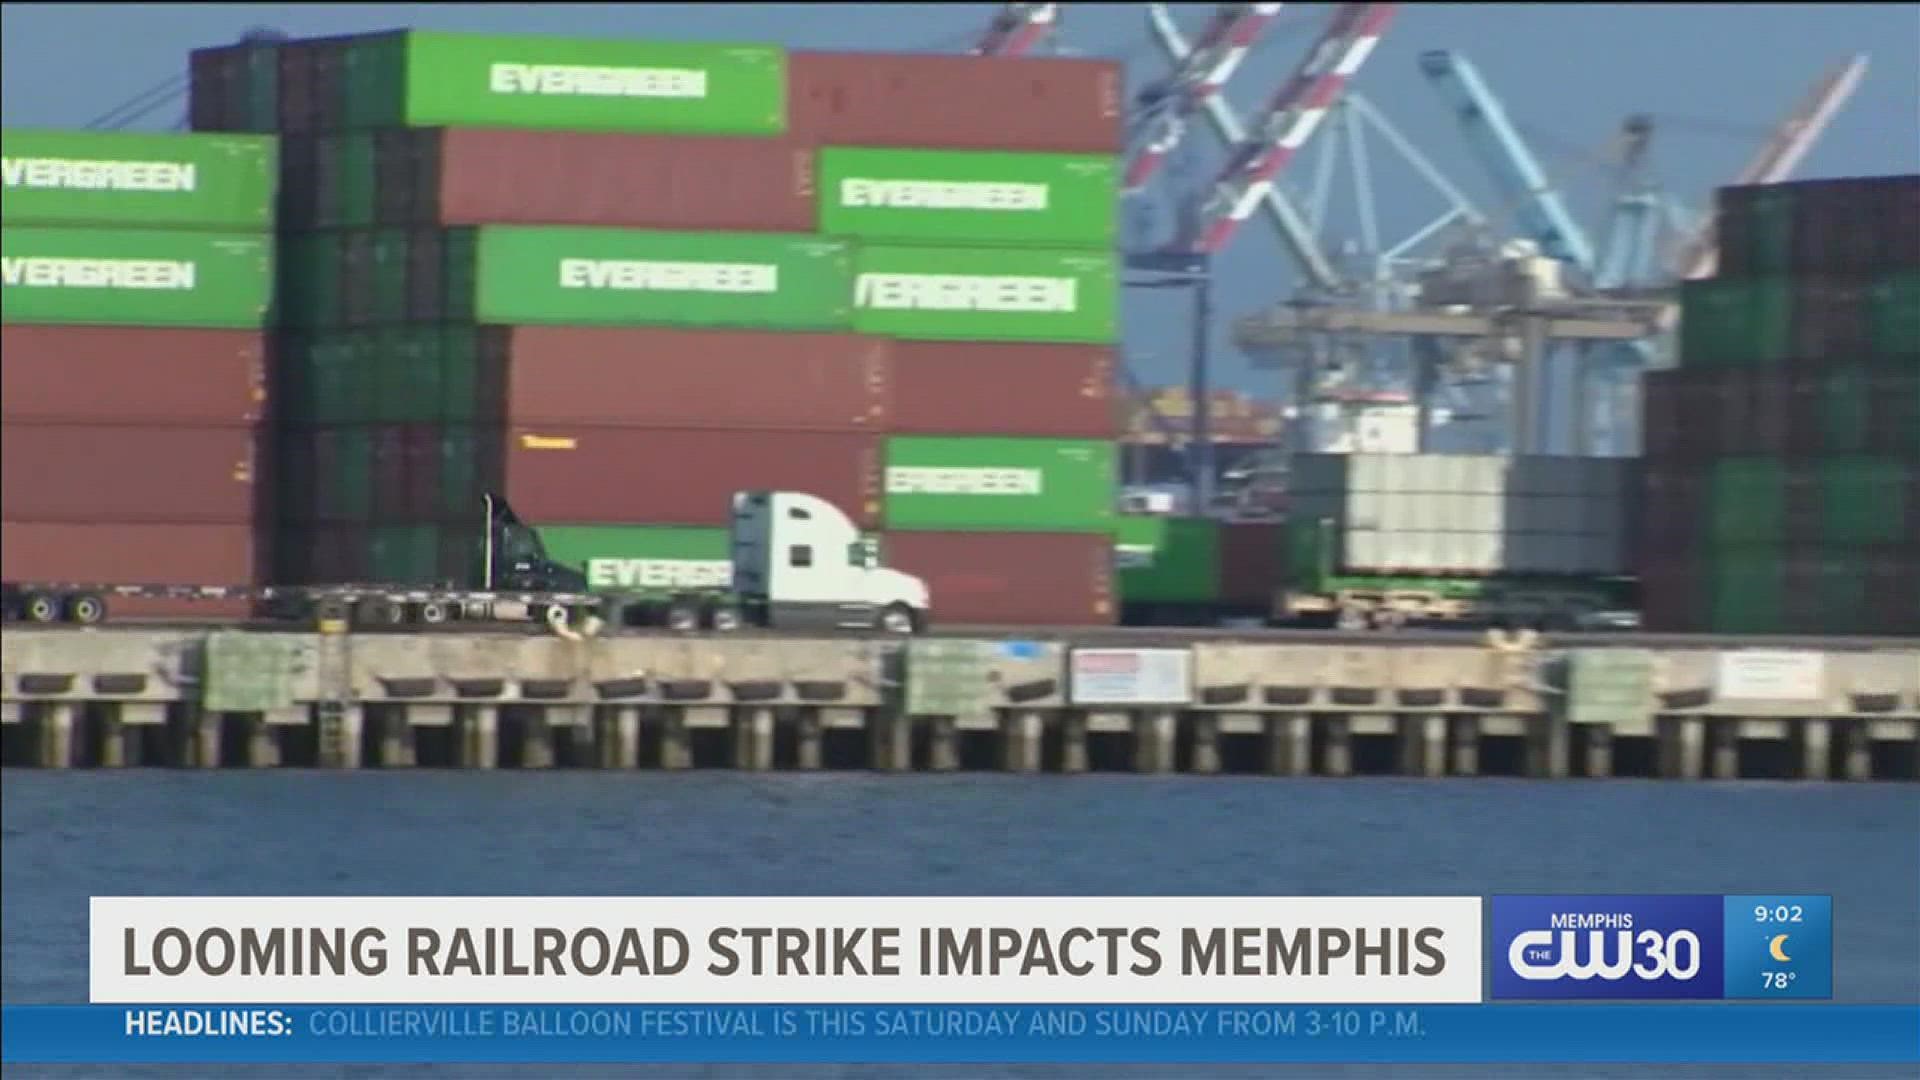 What helps keep Memphis moving is shipping and without rail freight moving, it could quickly mean a major loss for us.